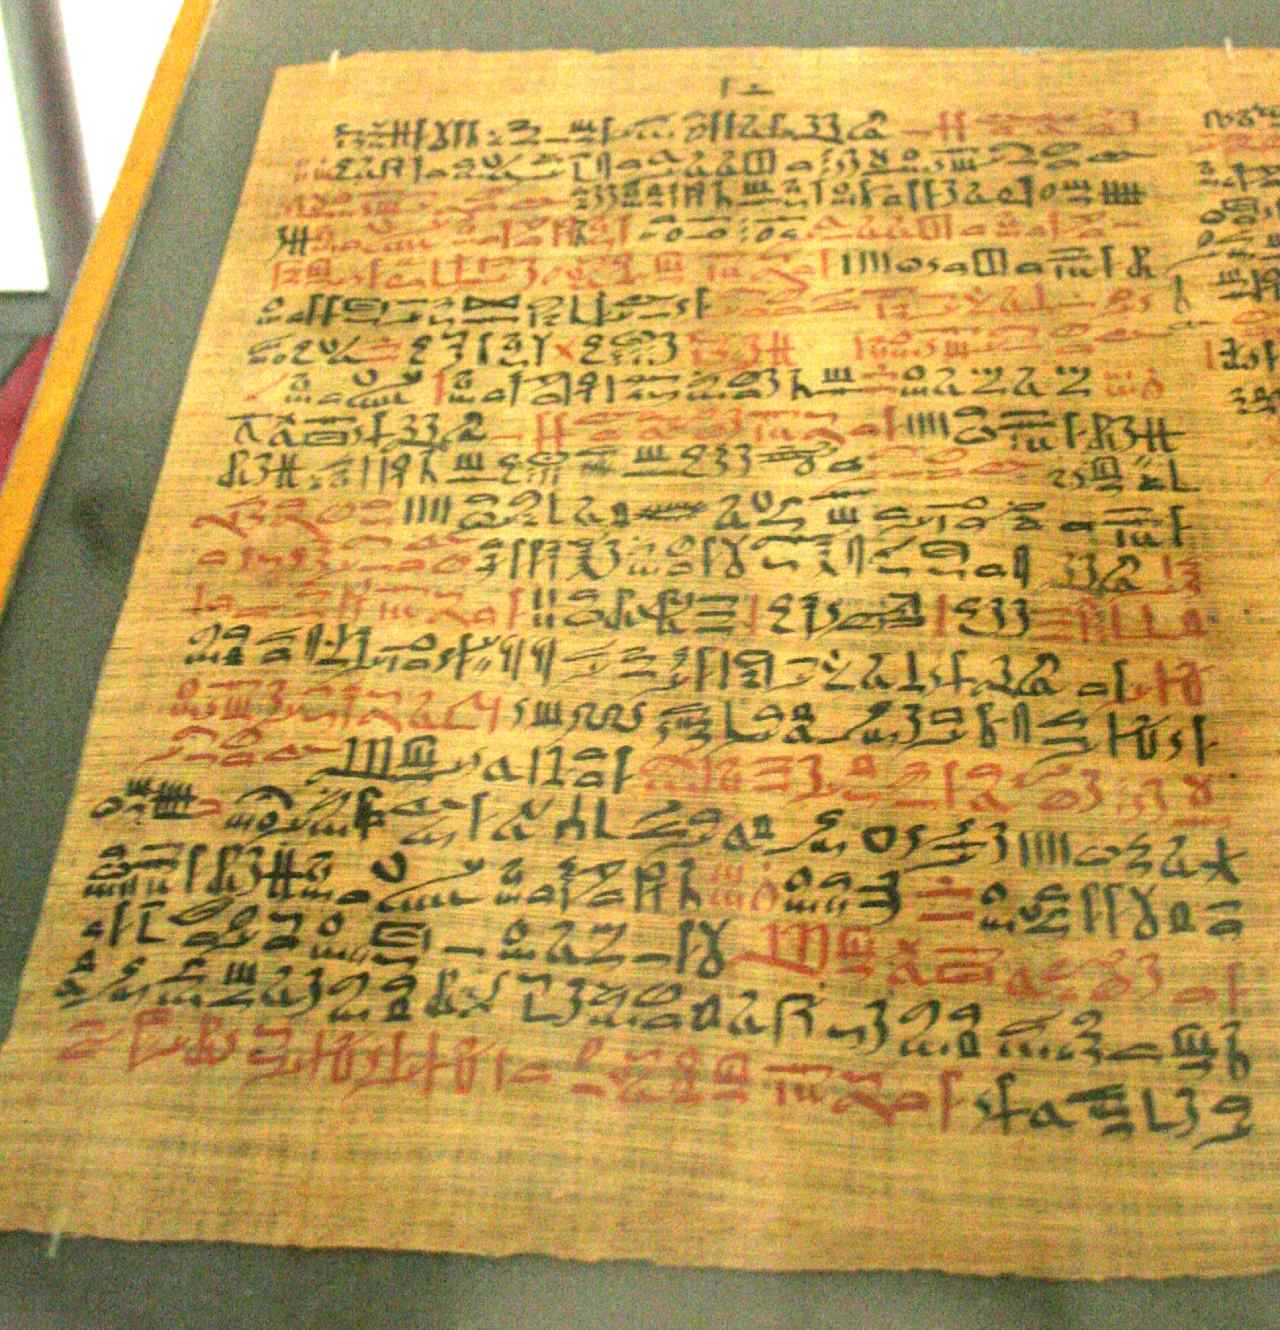 The Ebers Papyrus (c. 1550 BC) from ancient Egypt. (CC BY SA 3.0)